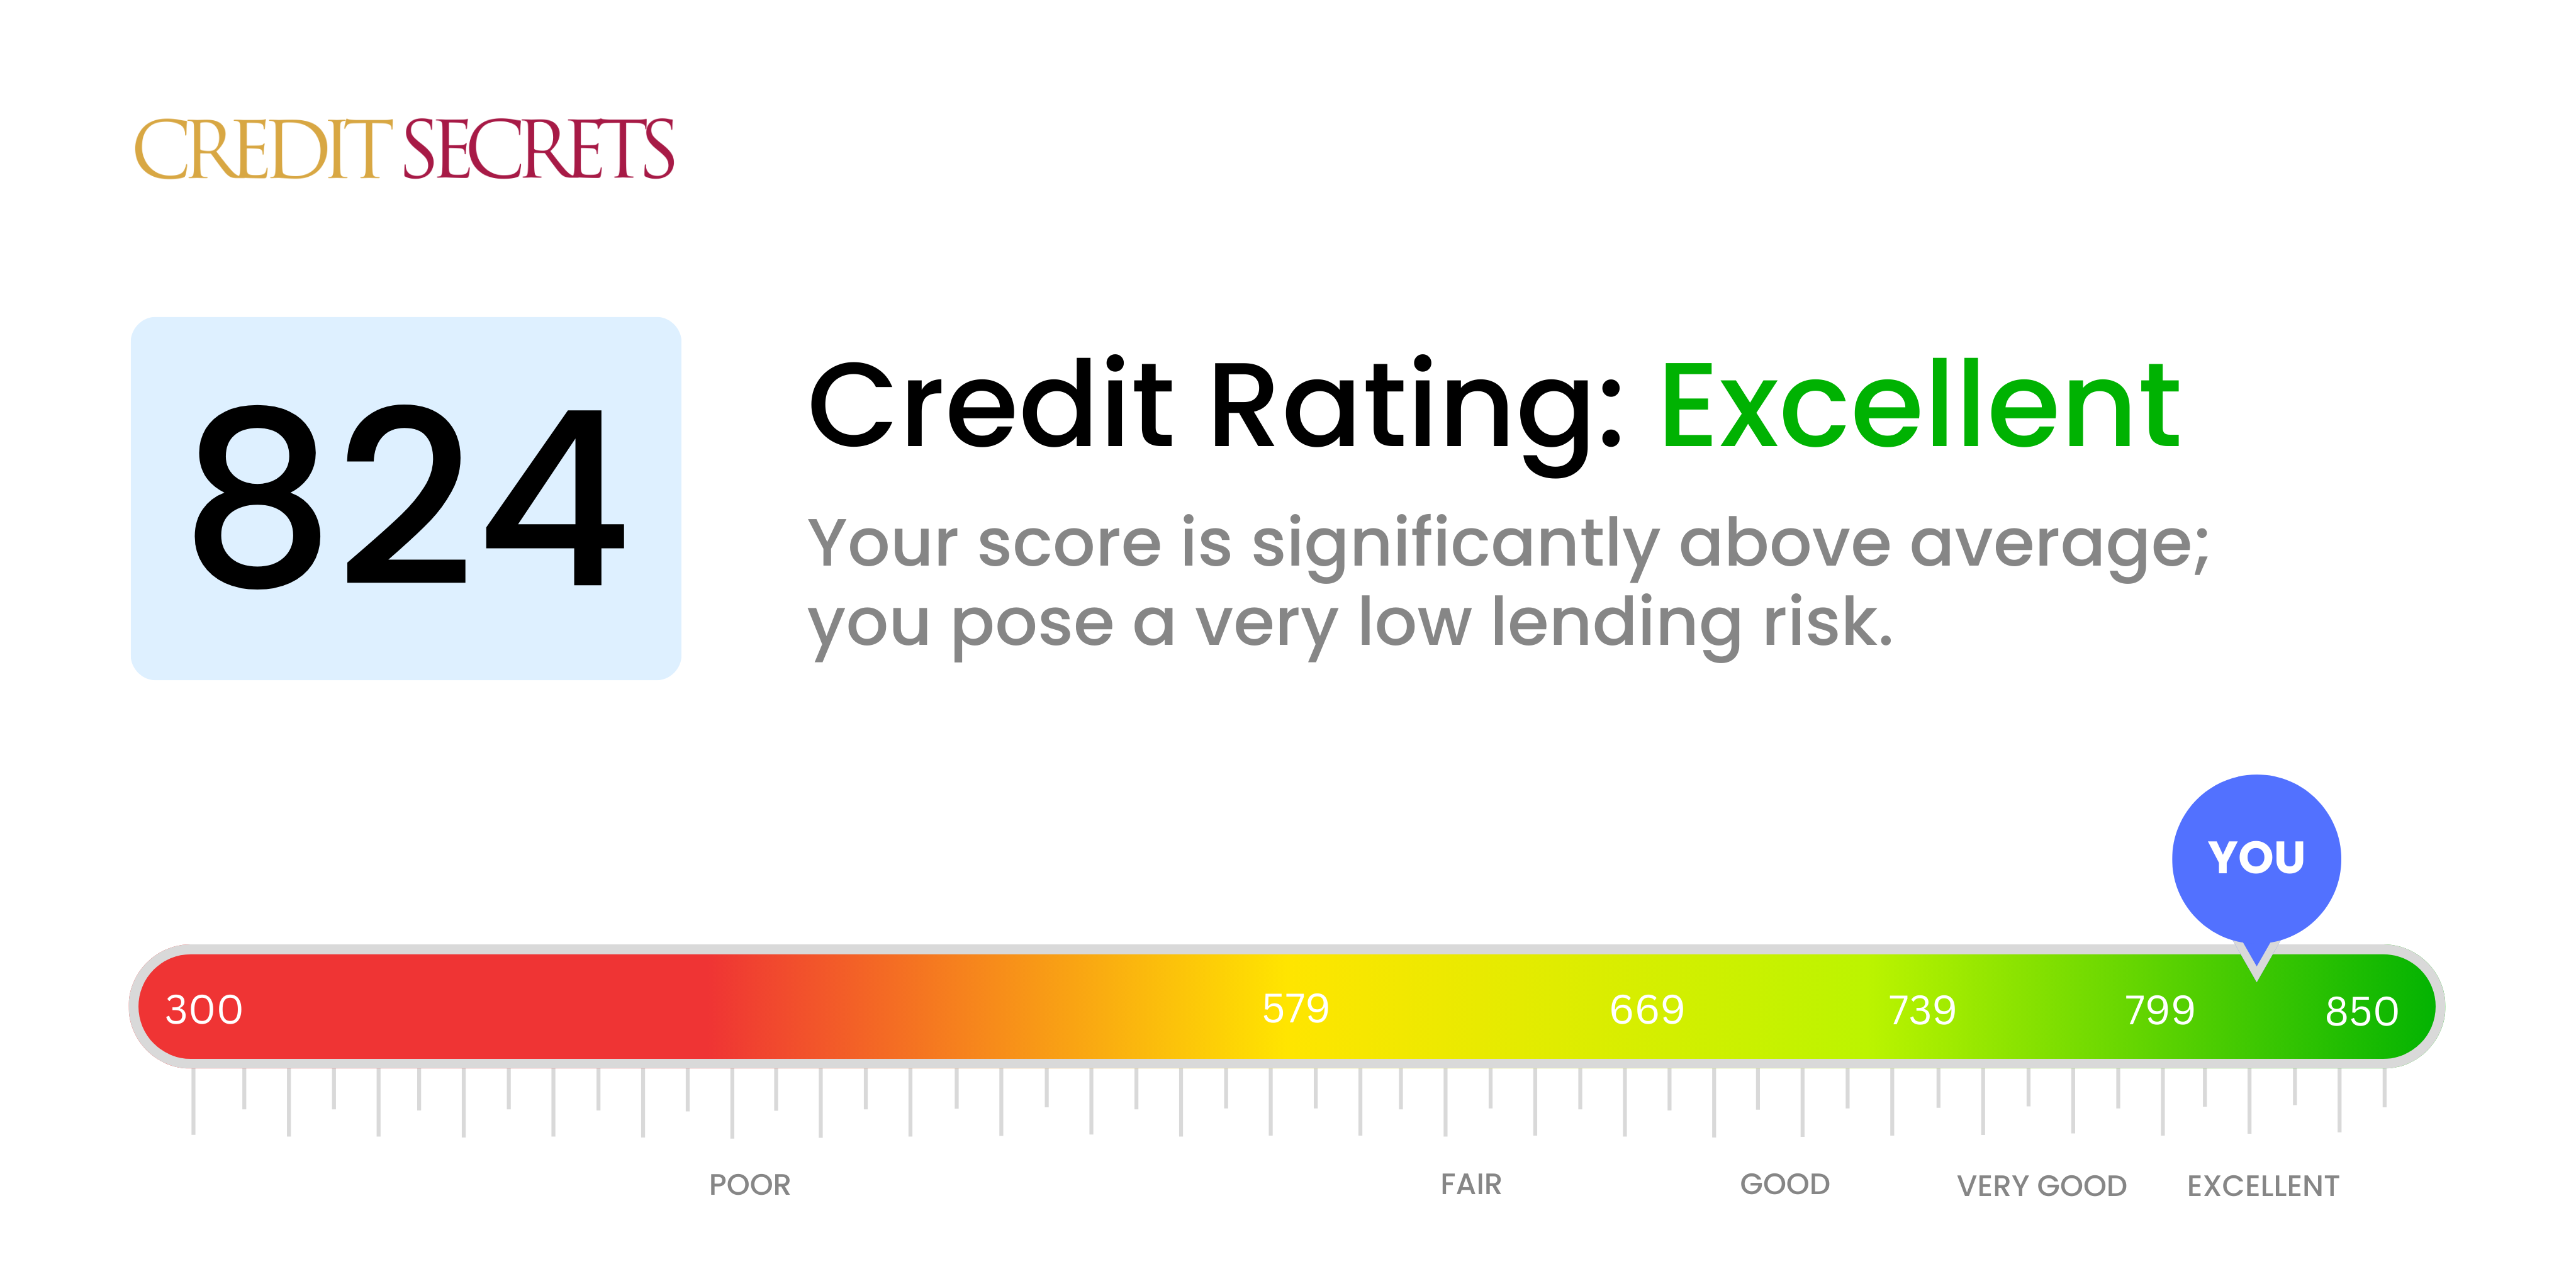 Is 824 a good credit score?